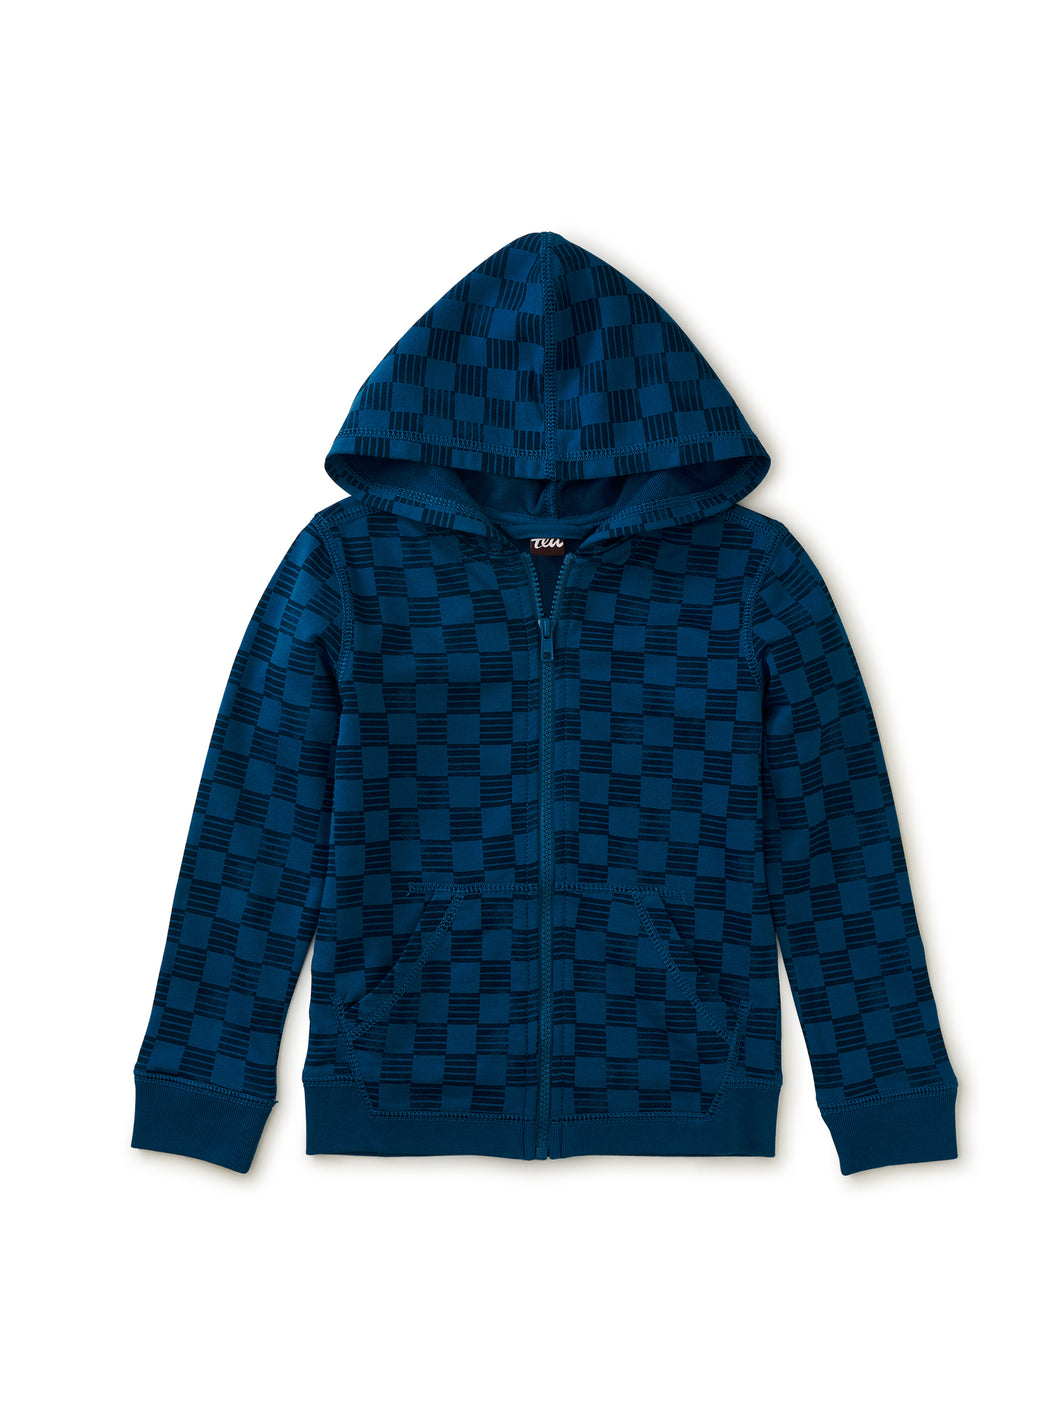 Tea Collection Good Sport Hoodie - Striped Checkerboard